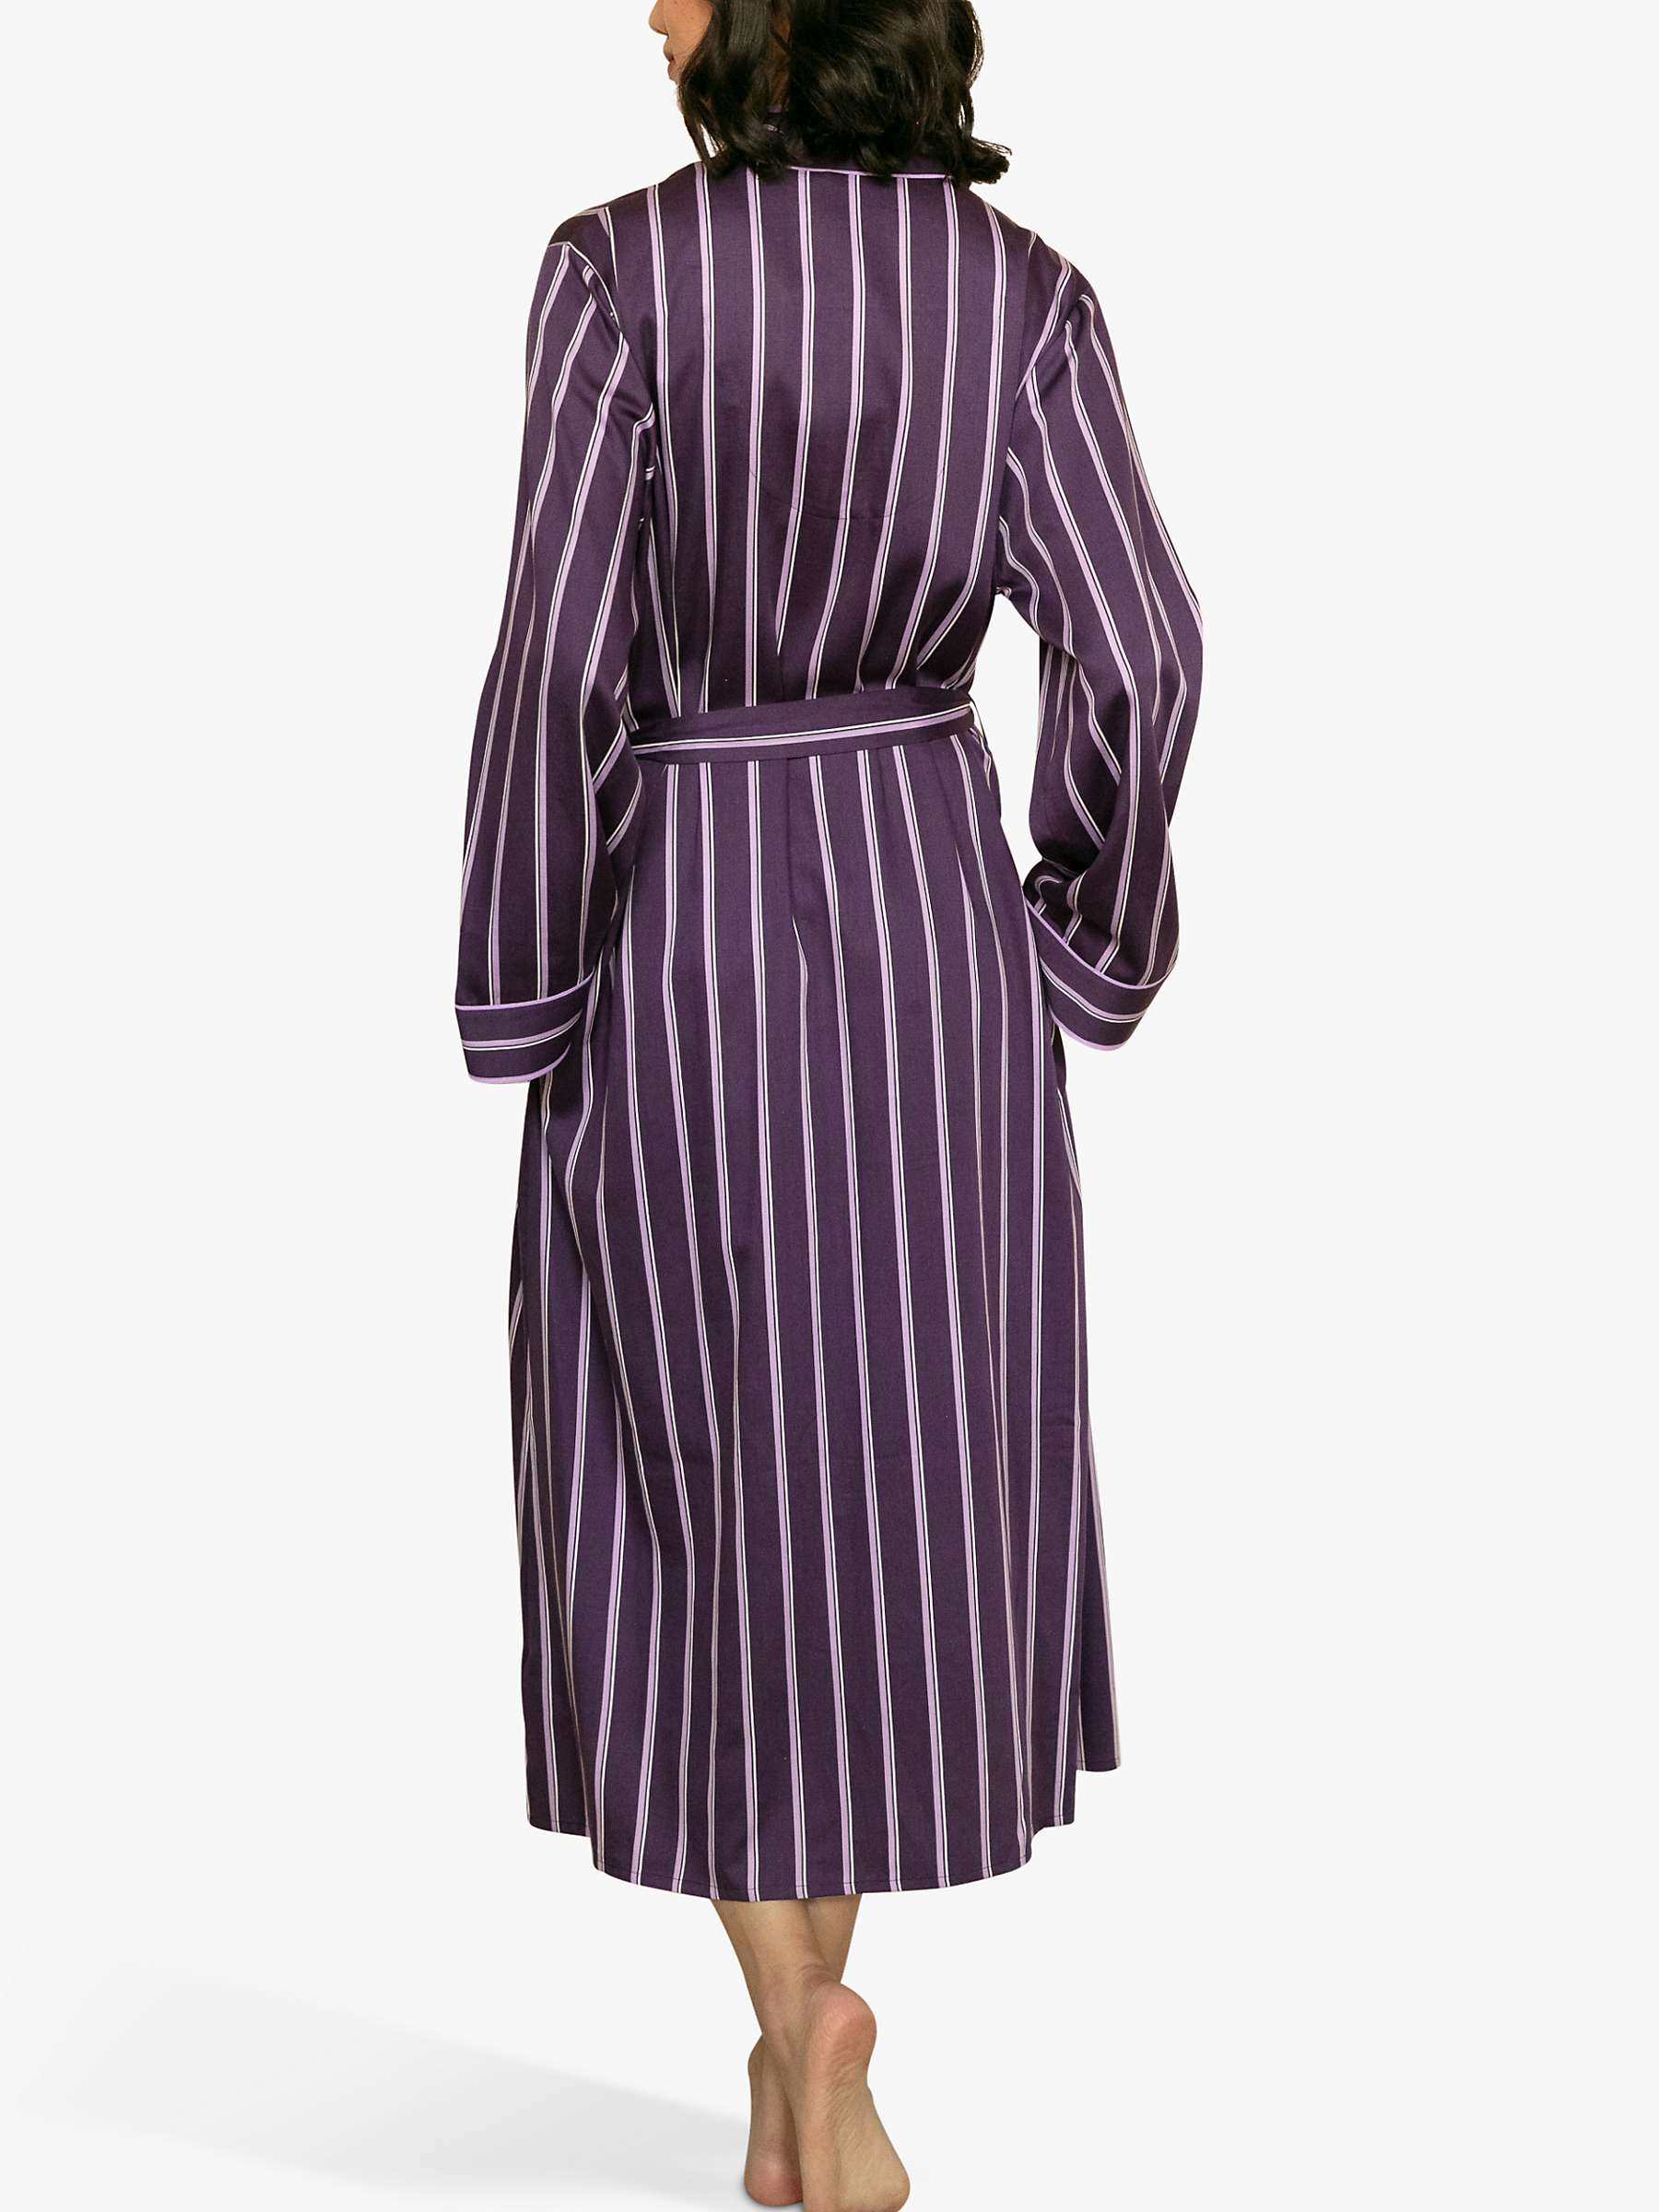 Buy Fable & Eve Stripe Print Dressing Gown, Purple Online at johnlewis.com